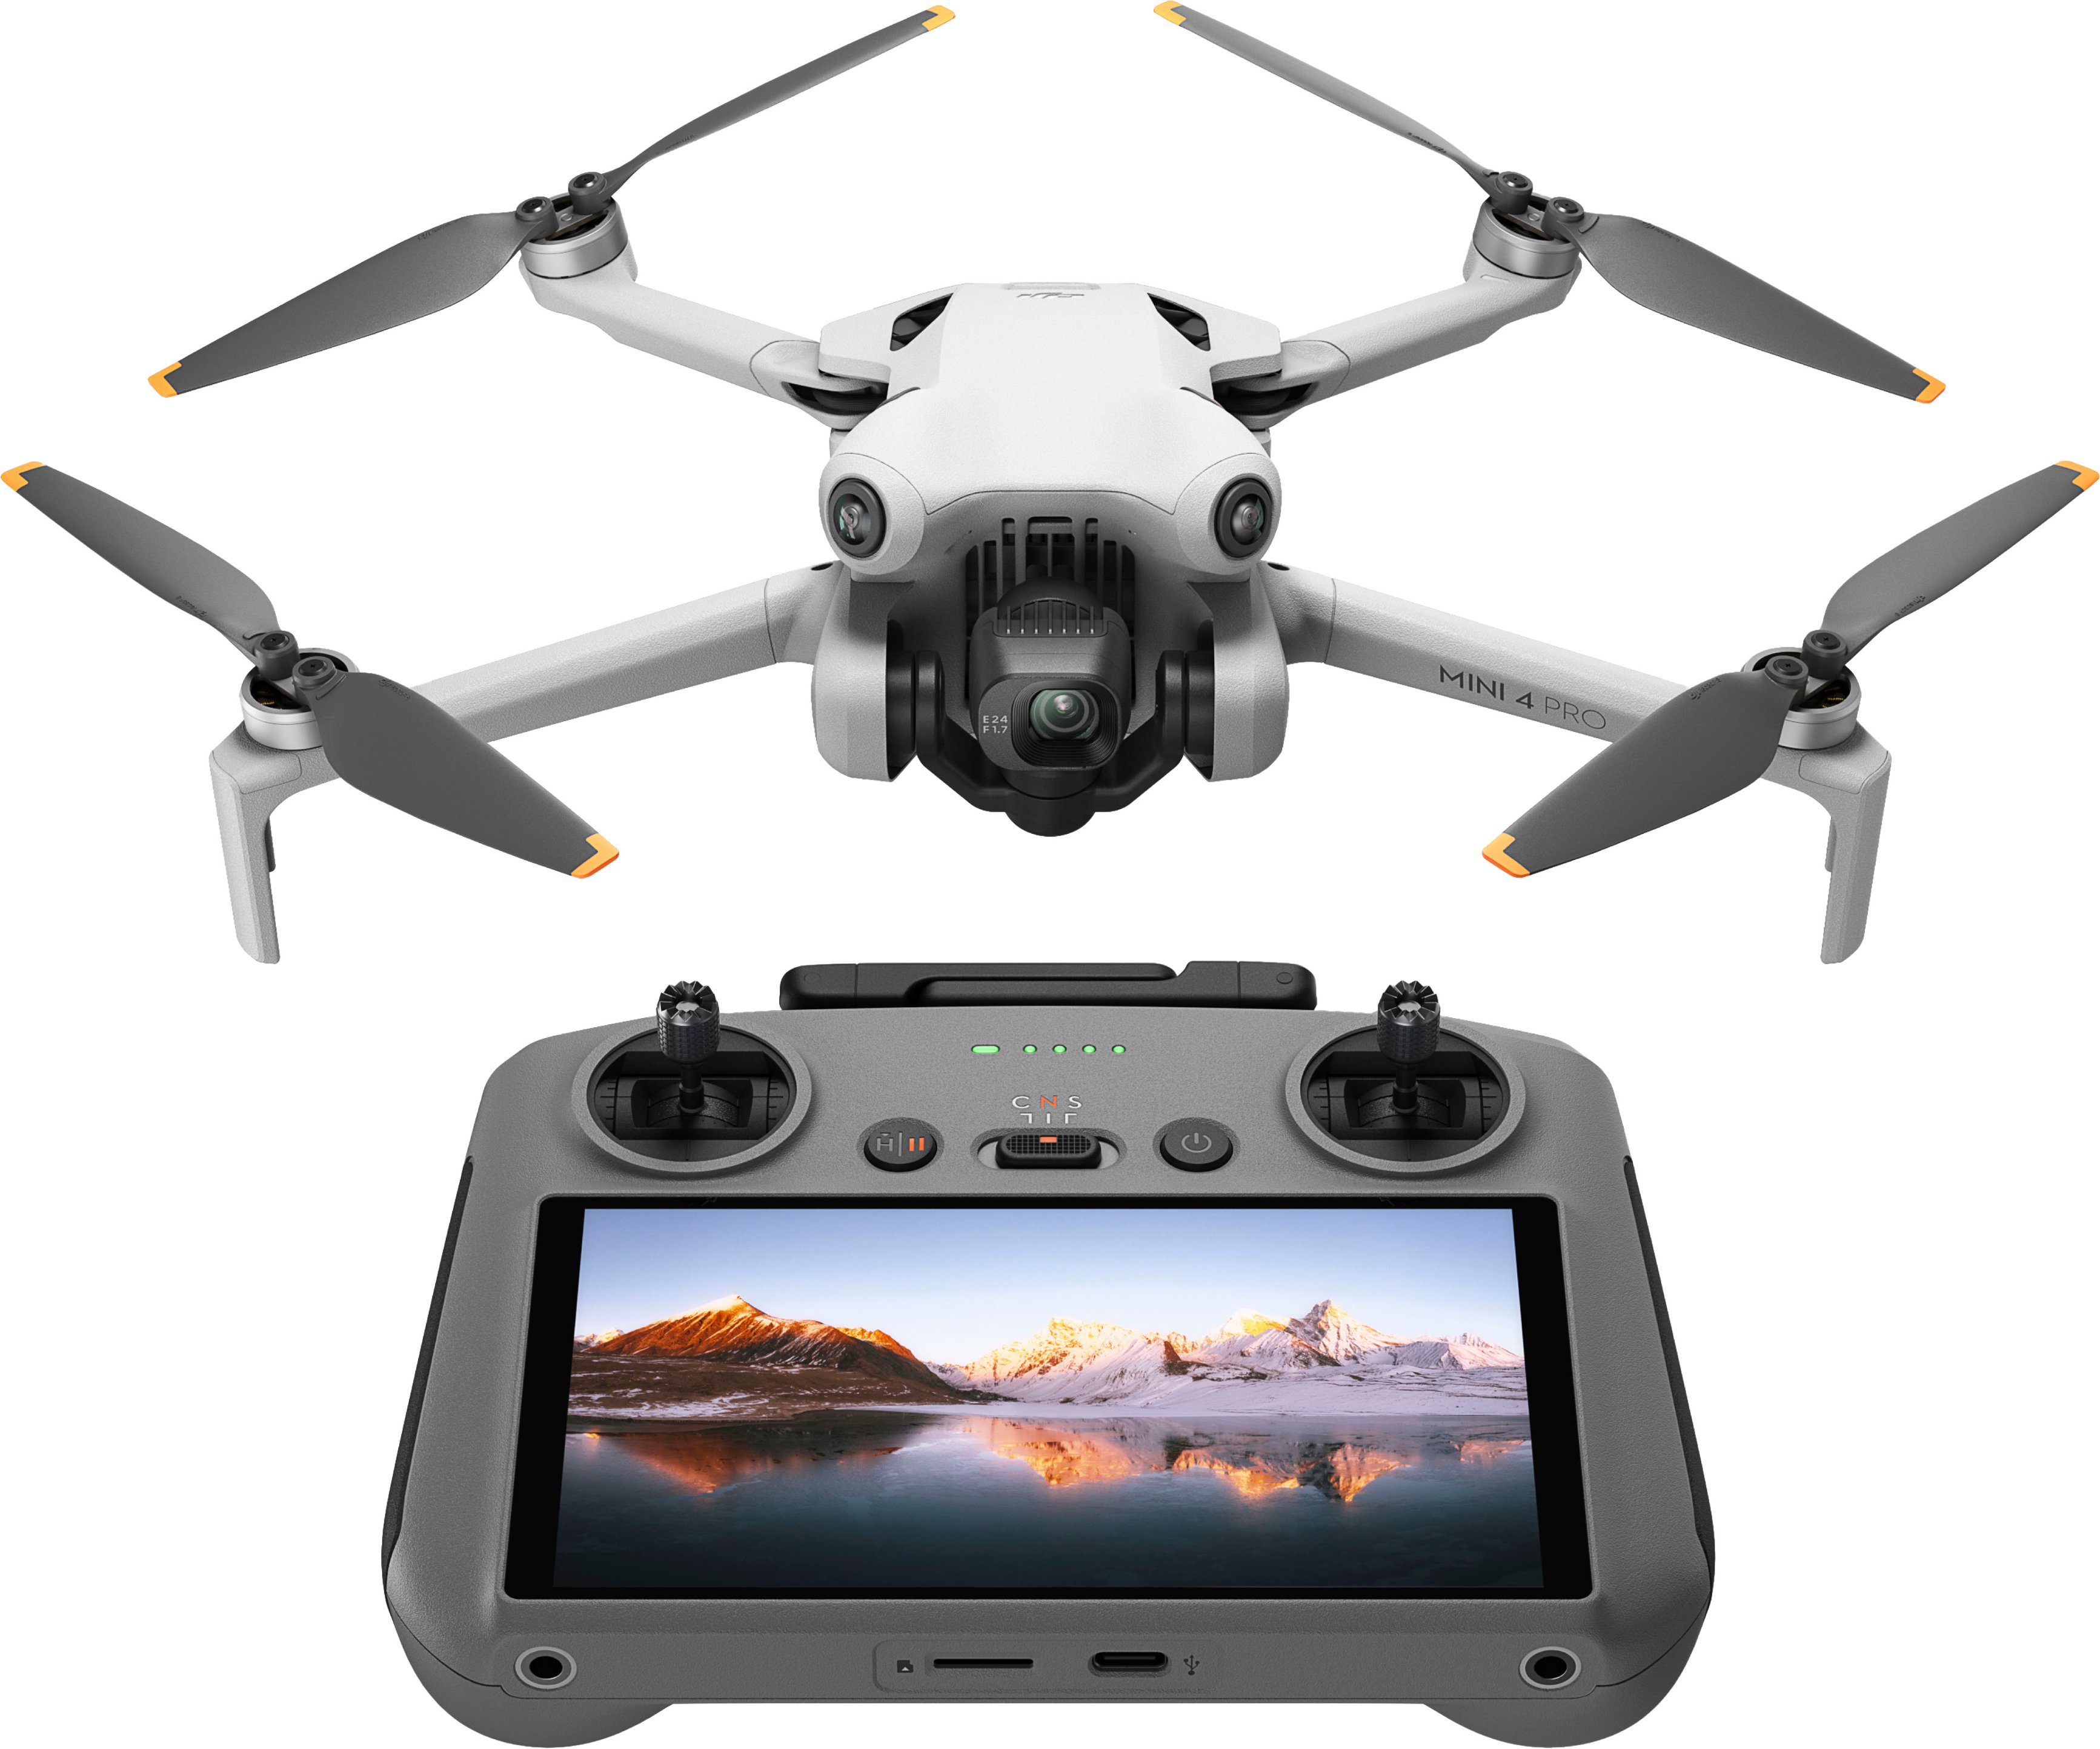 DJI Mini 4 Pro Drone and RC 2 Remote Control with Built-in Screen